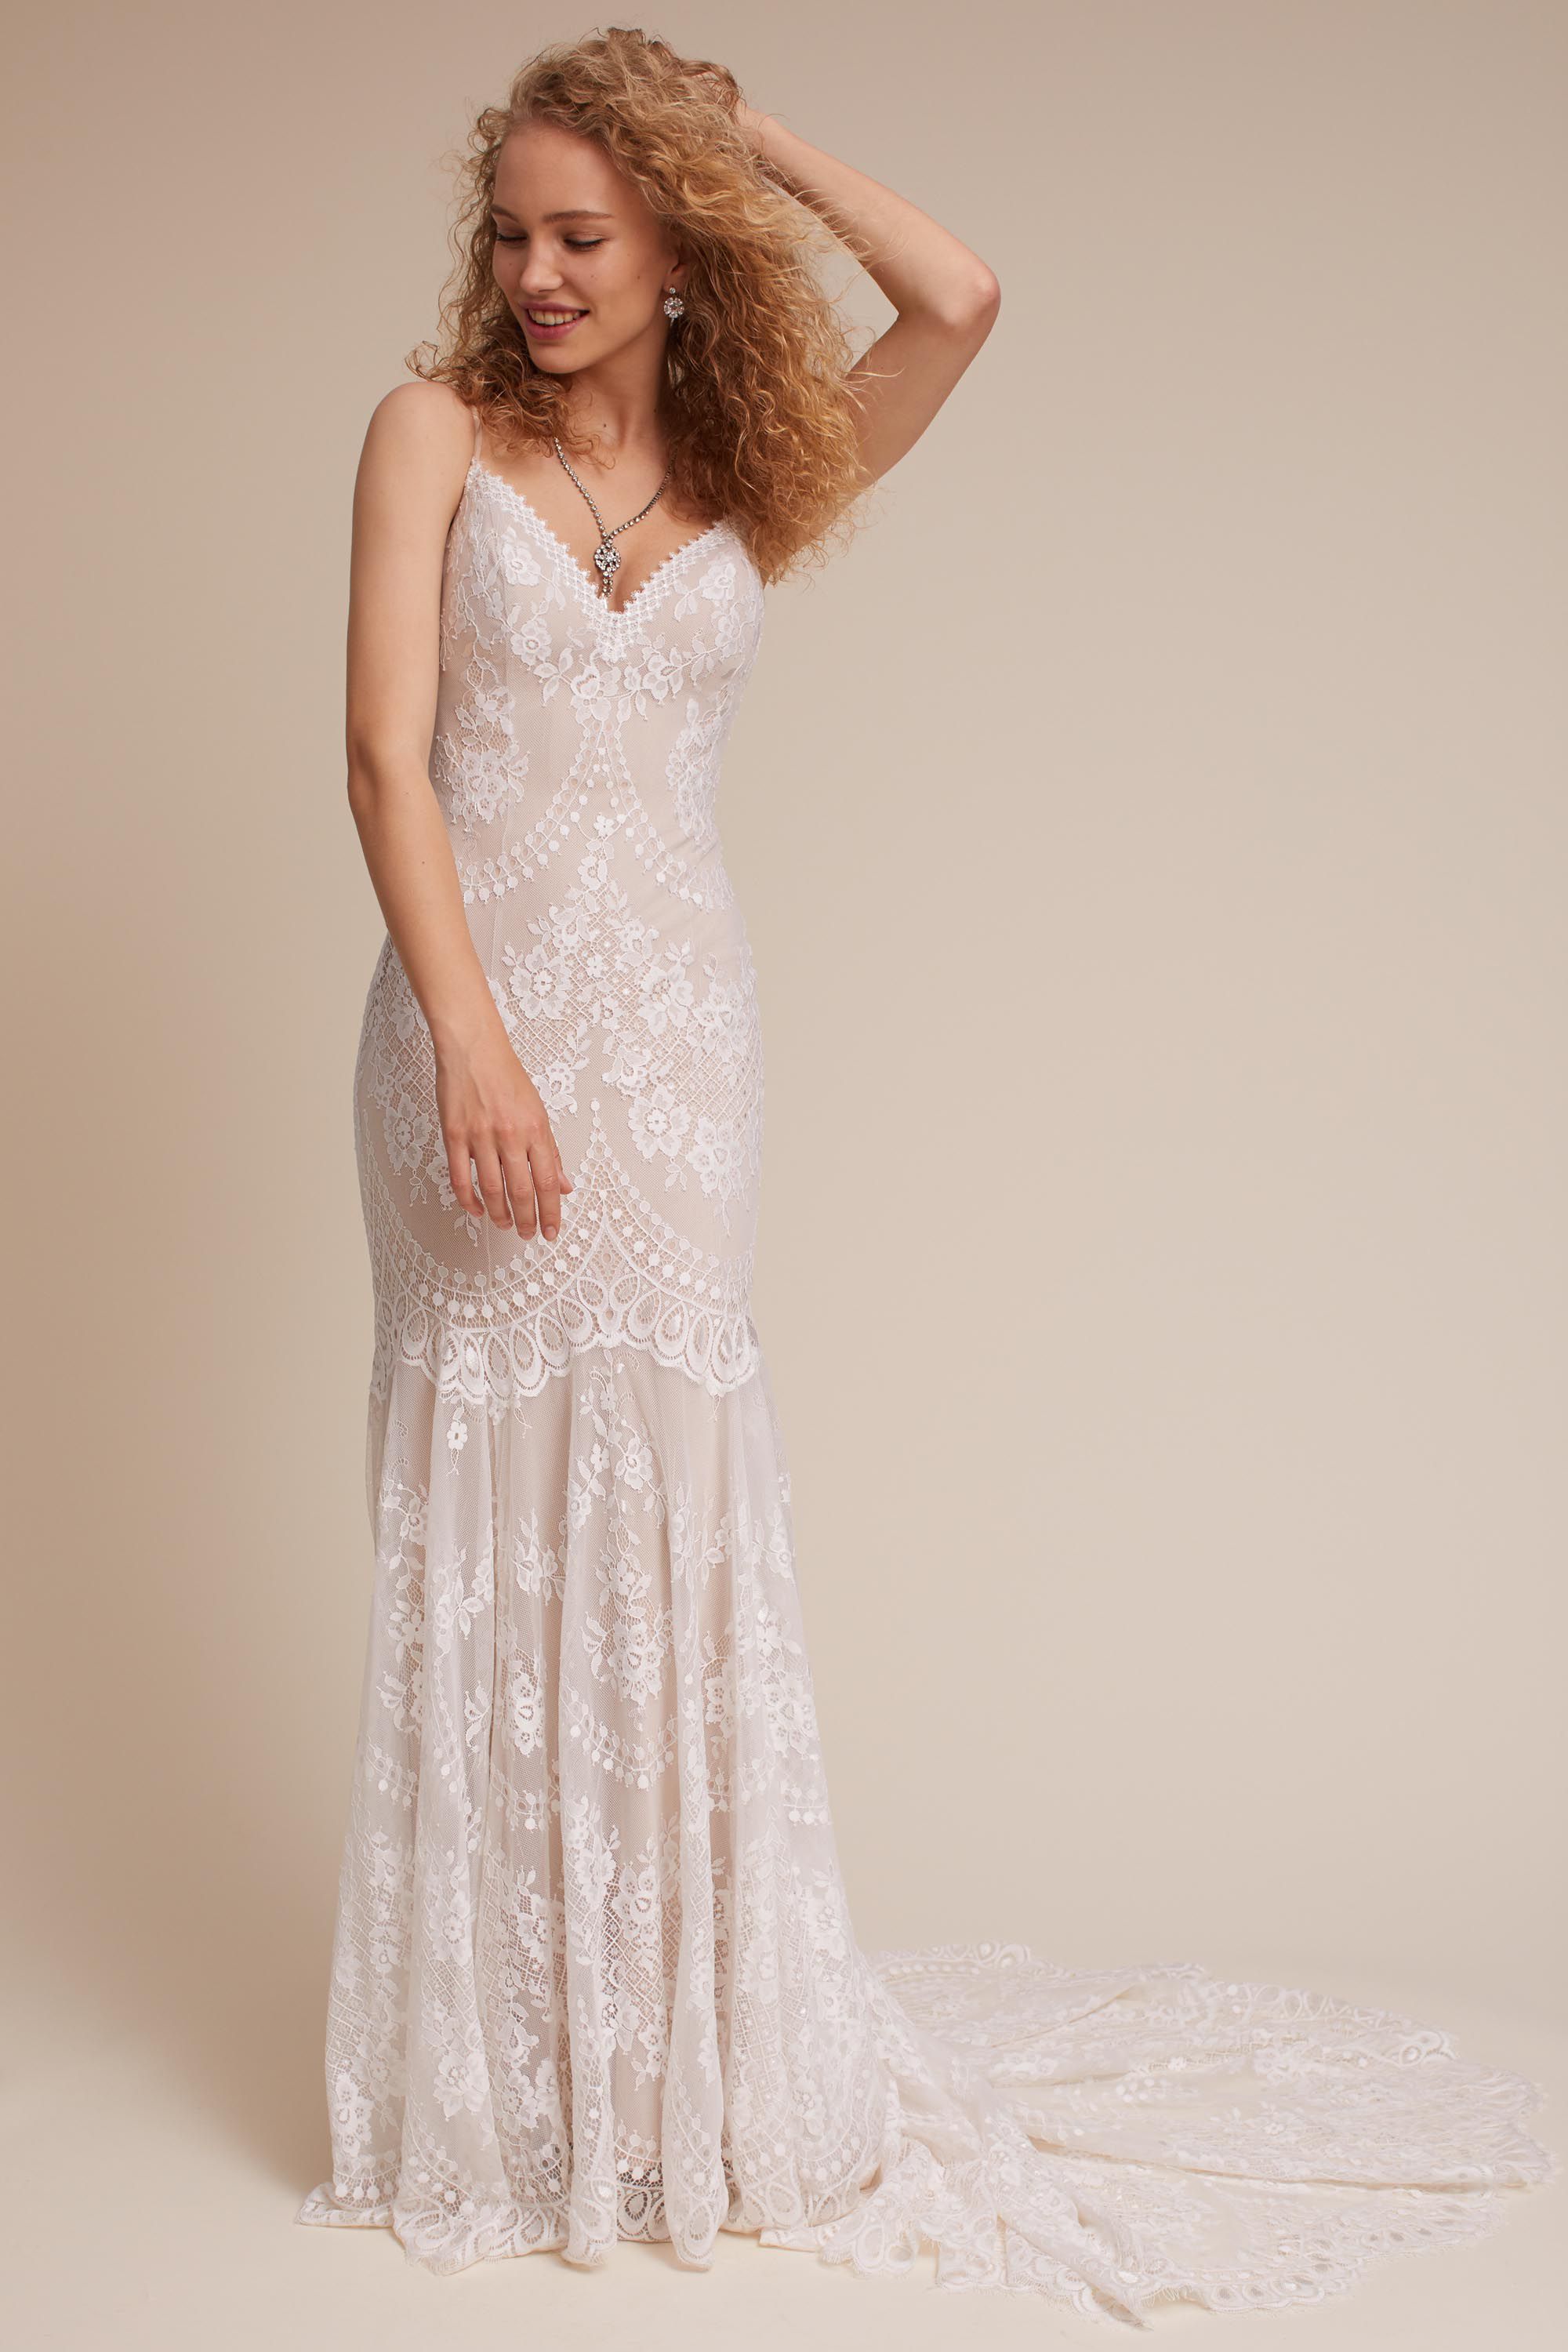 Cascading Lace Gown - BHLDN